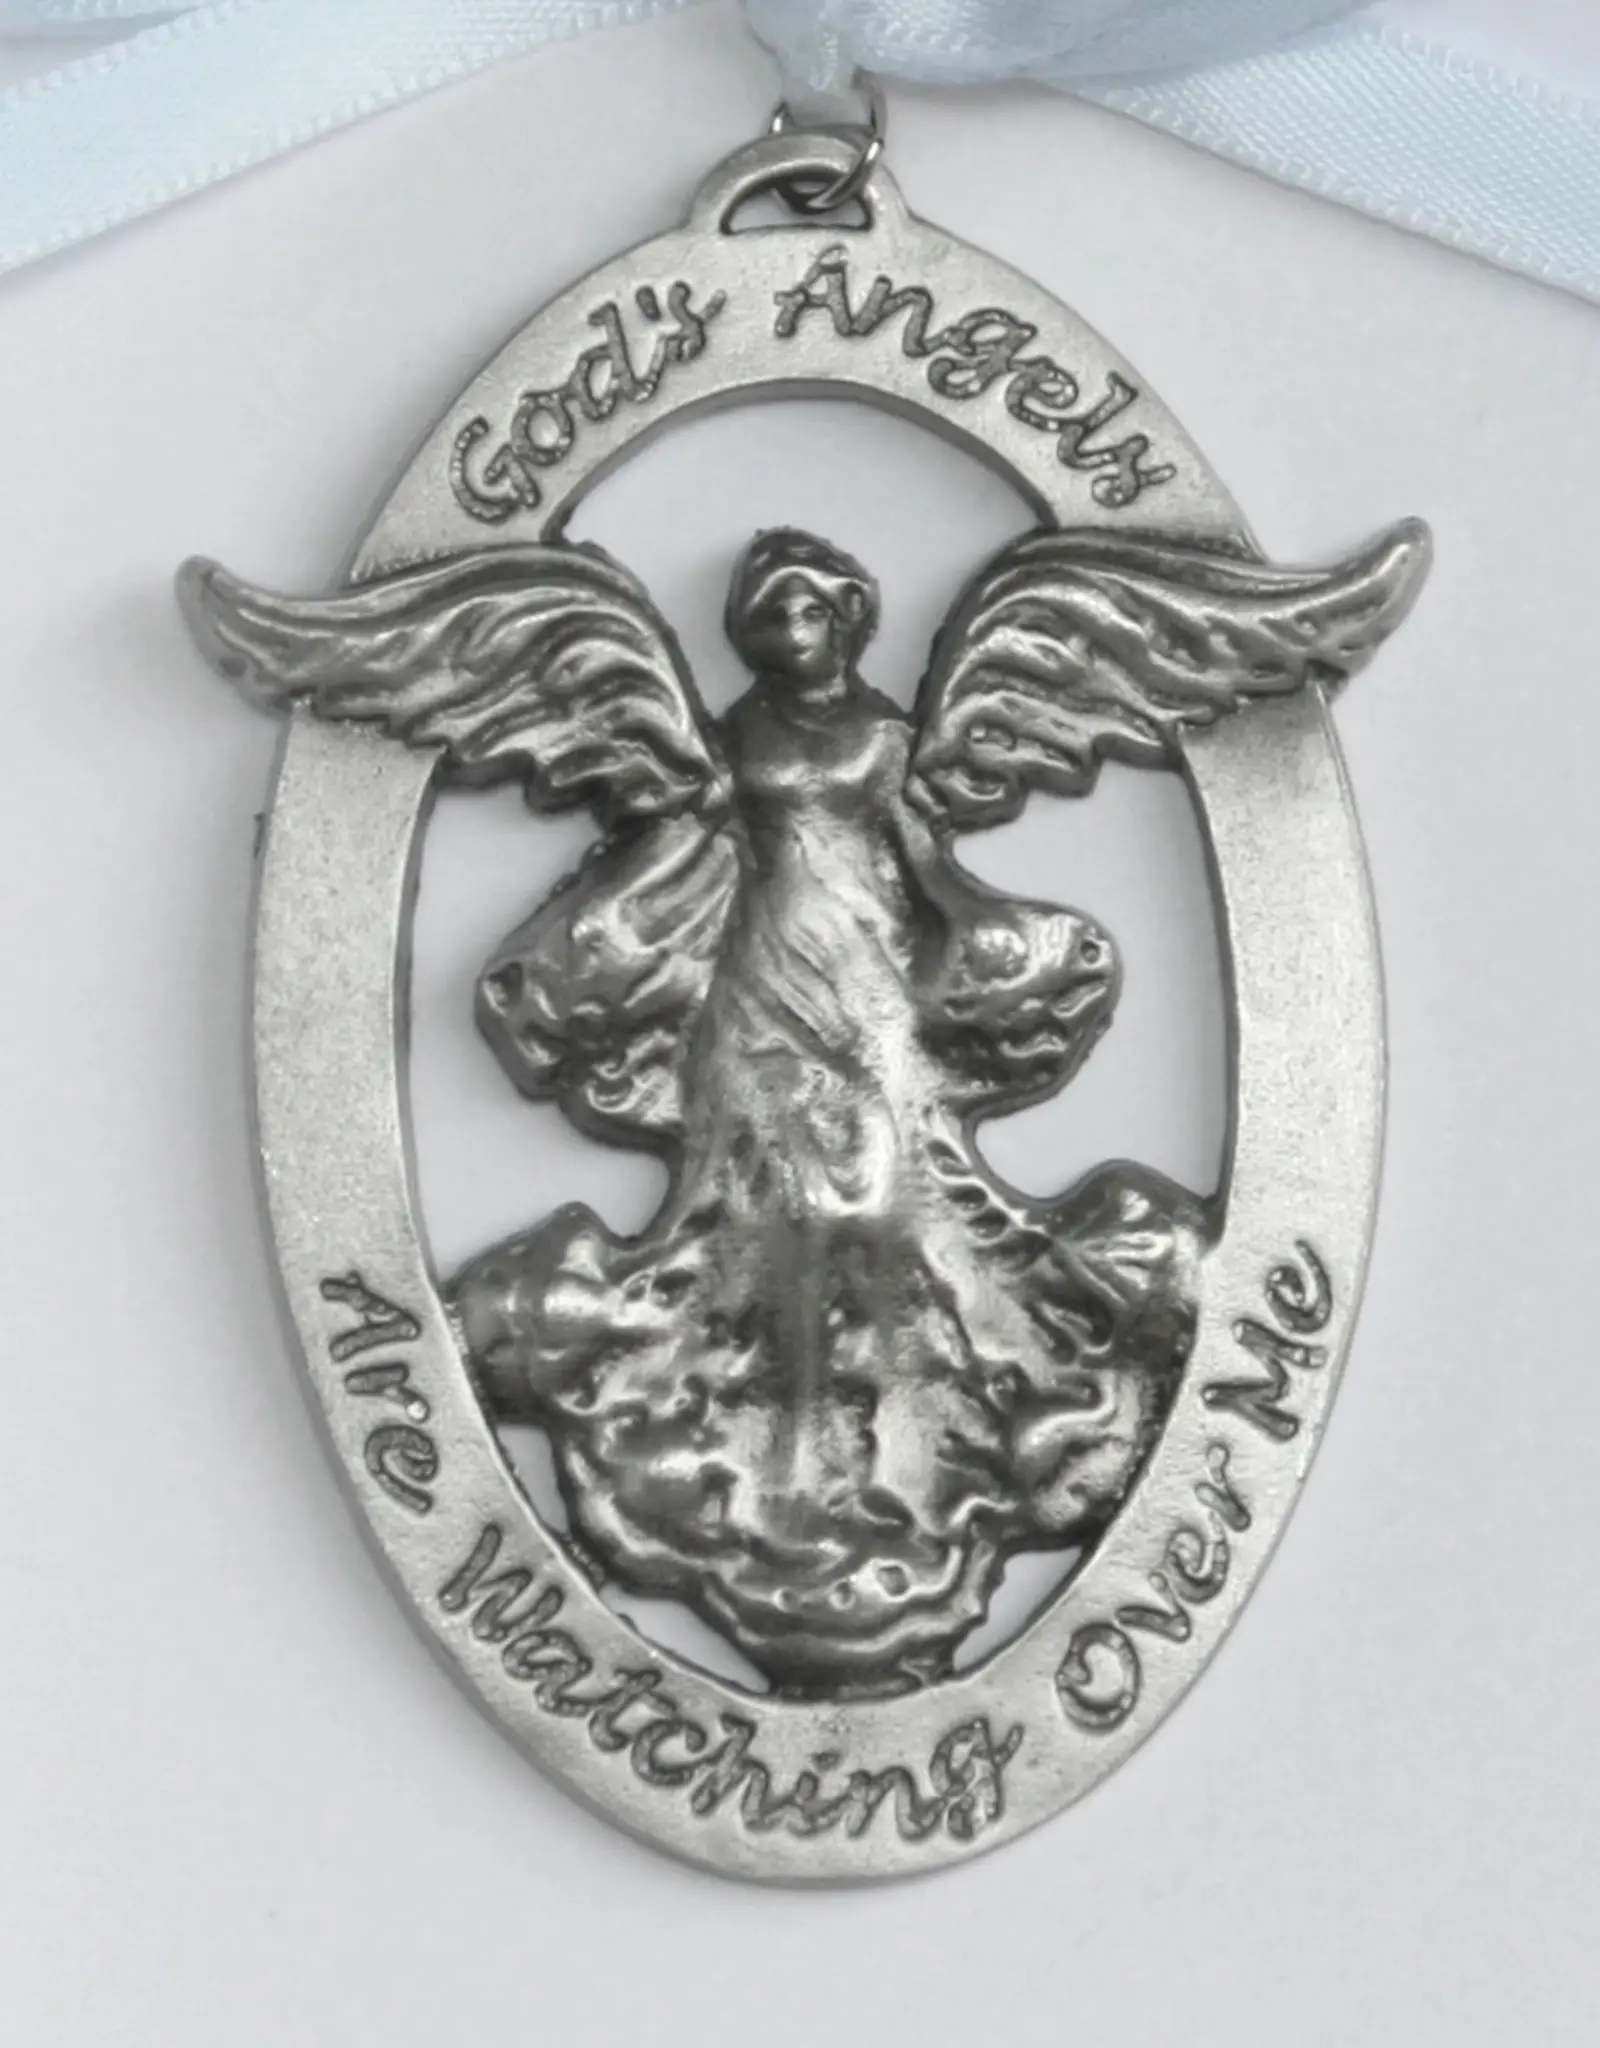 Collectables Baby Cradle Medal Angel for Boy